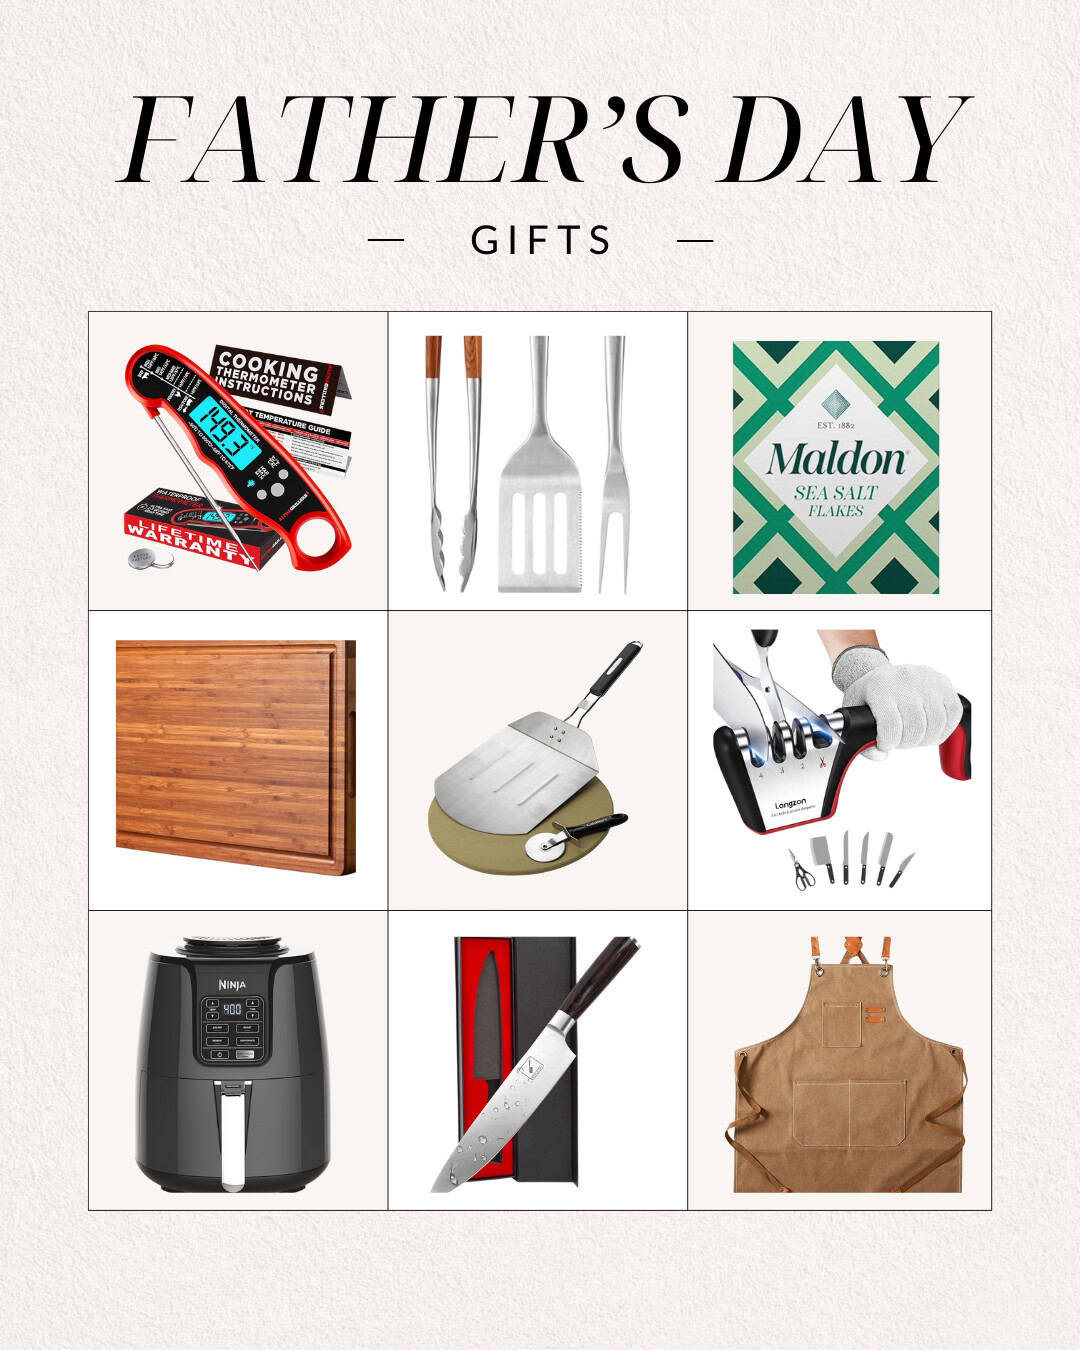 Father's Day Gift Ideas arranged in a grid